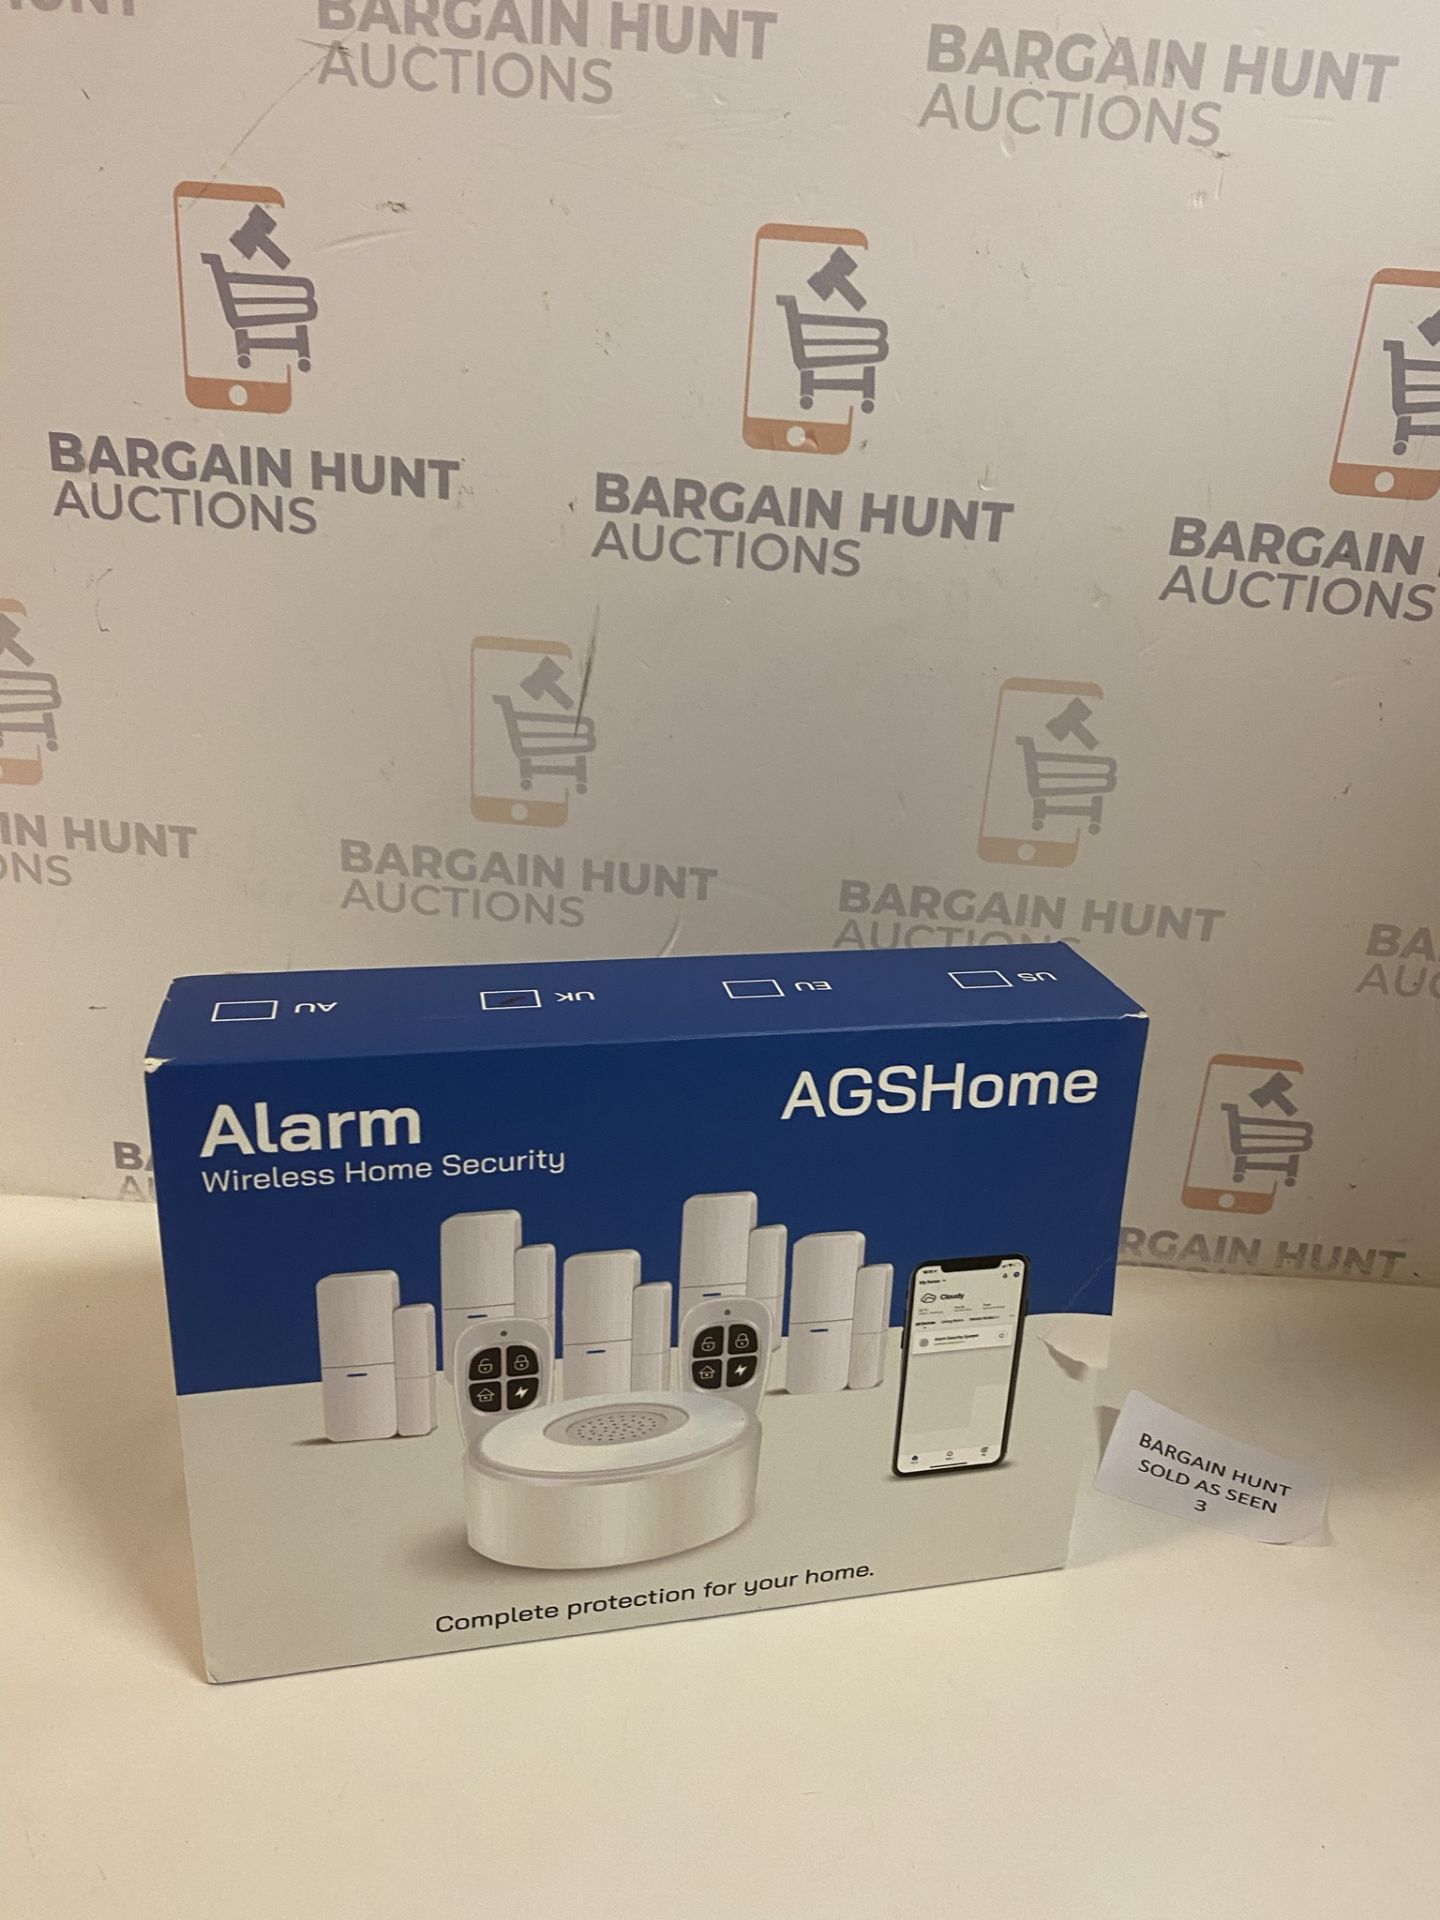 AGSHOME Wireless Alarm System, Smart Home Alarm Security (for contents, see image)